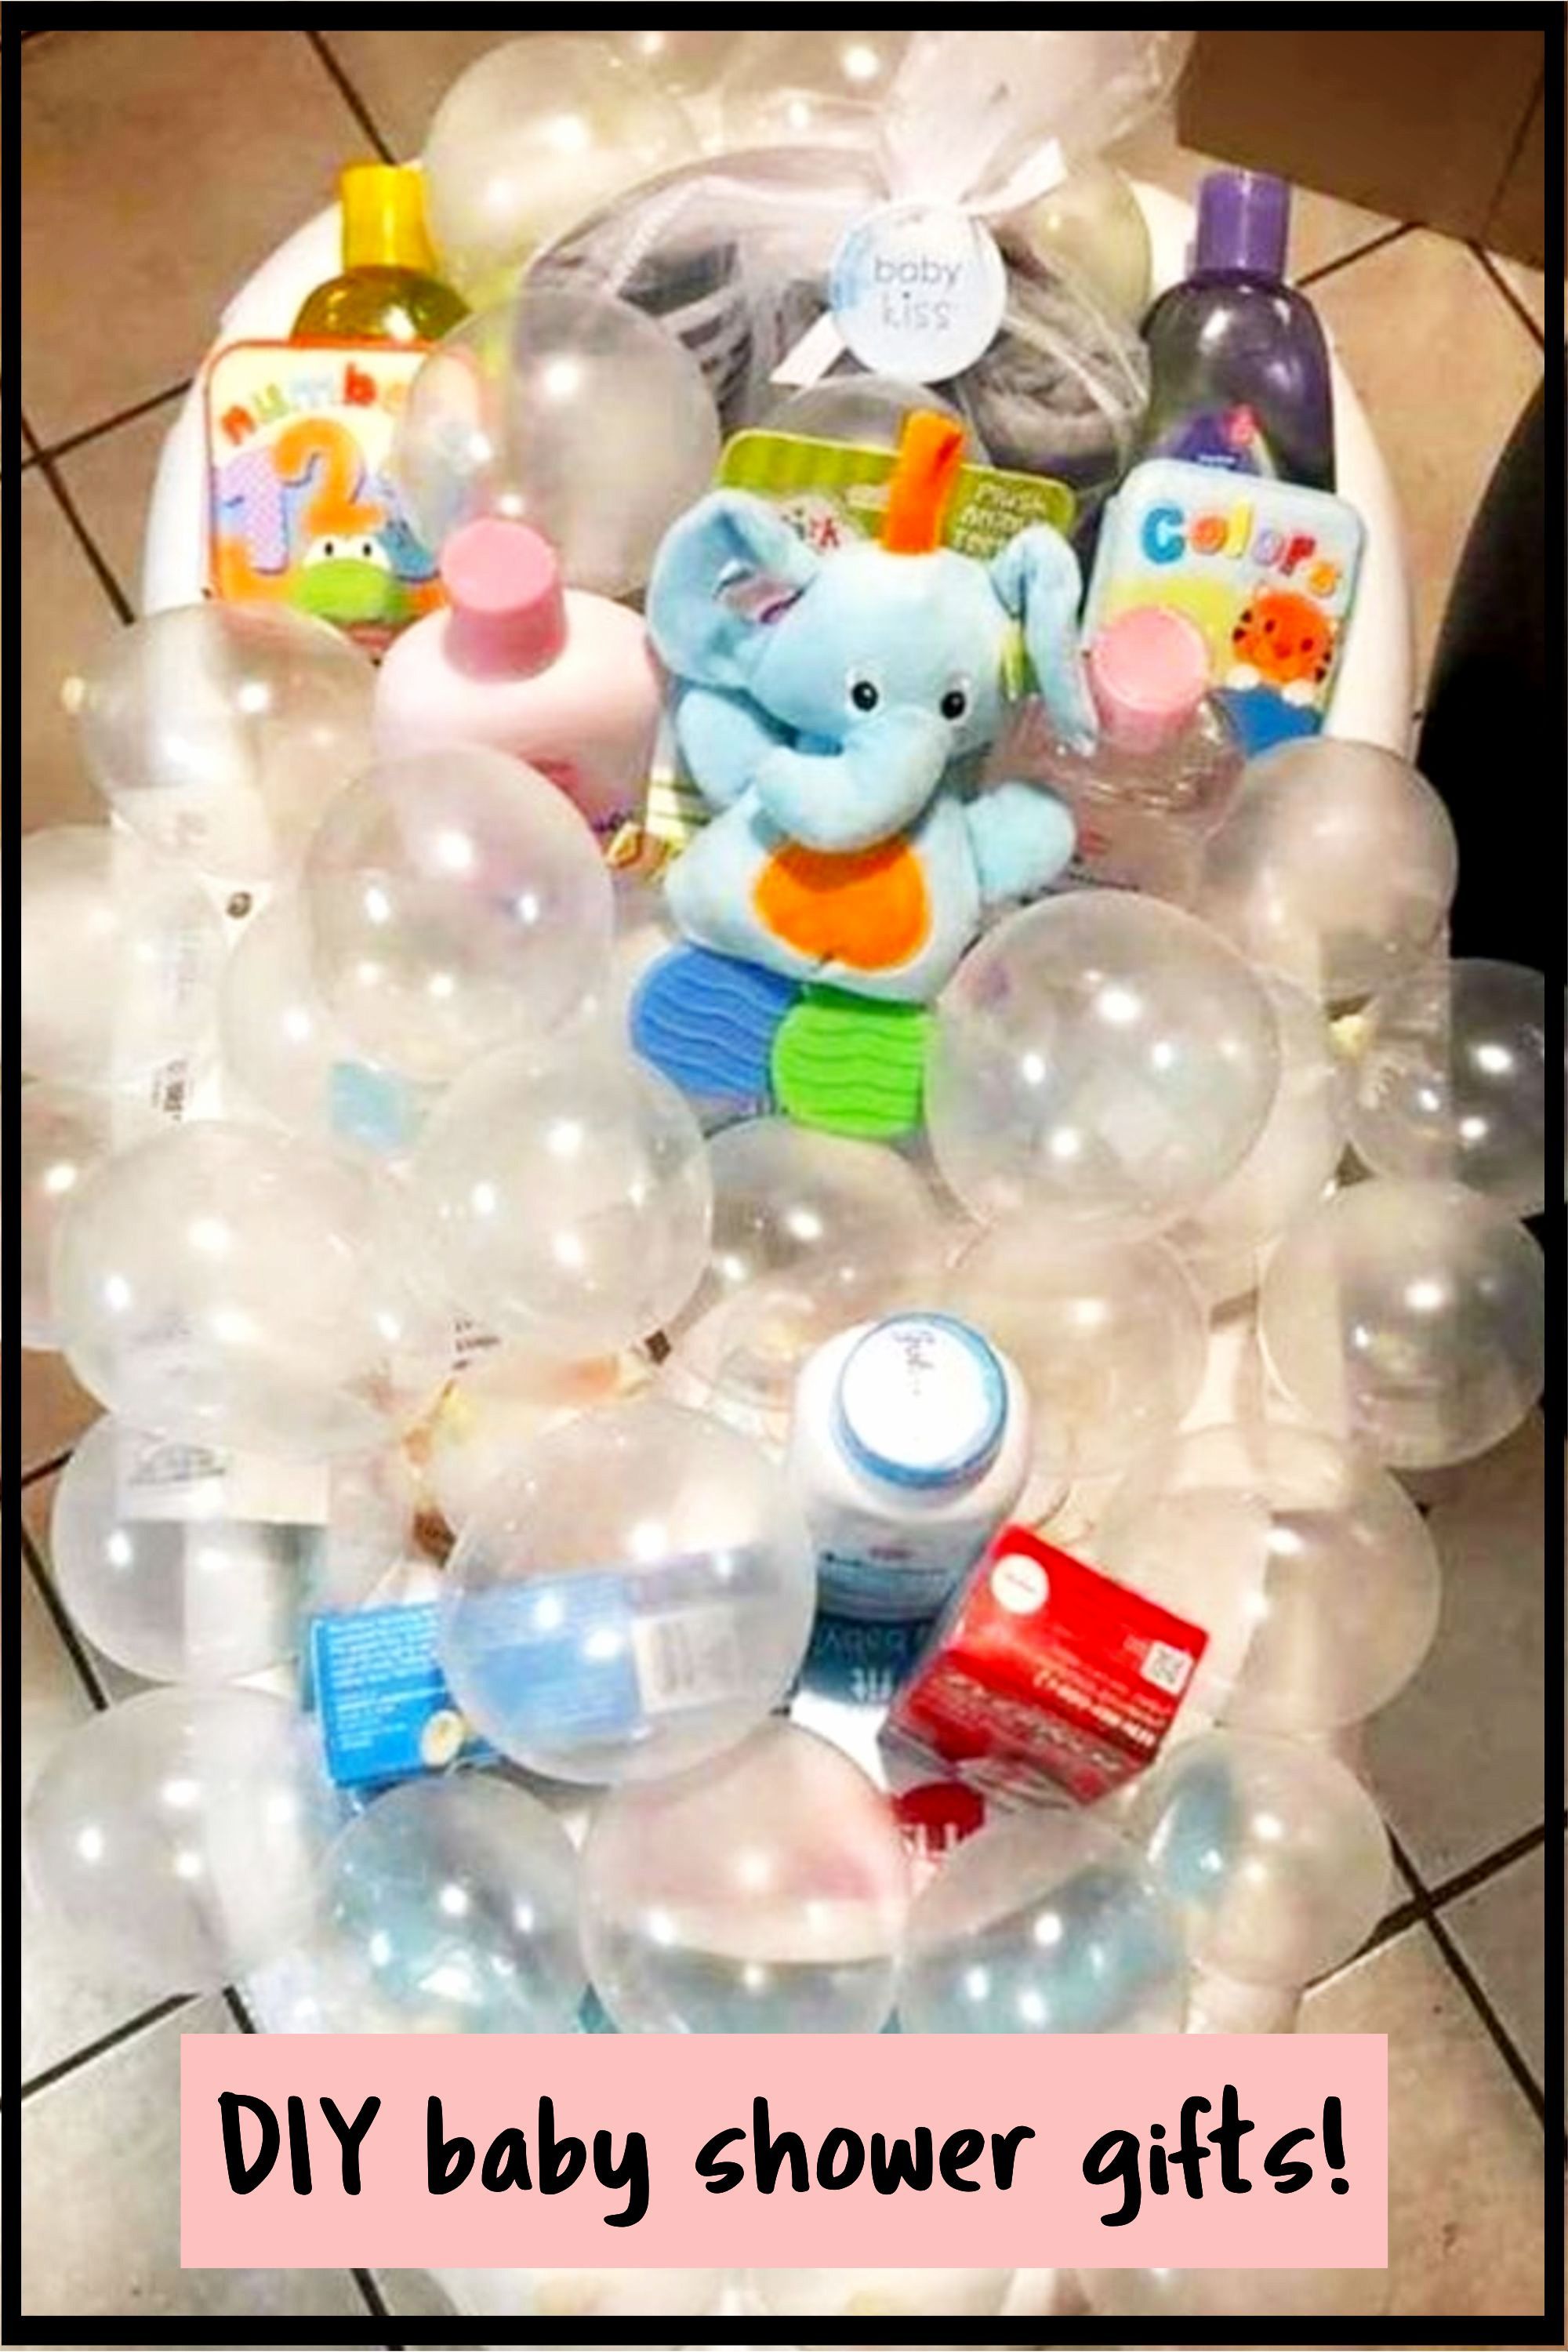 28 Affordable & Cheap Baby Shower Gift Ideas For Those on a Budget • 2020 Guide -   17 diy projects For Mom baby shower ideas